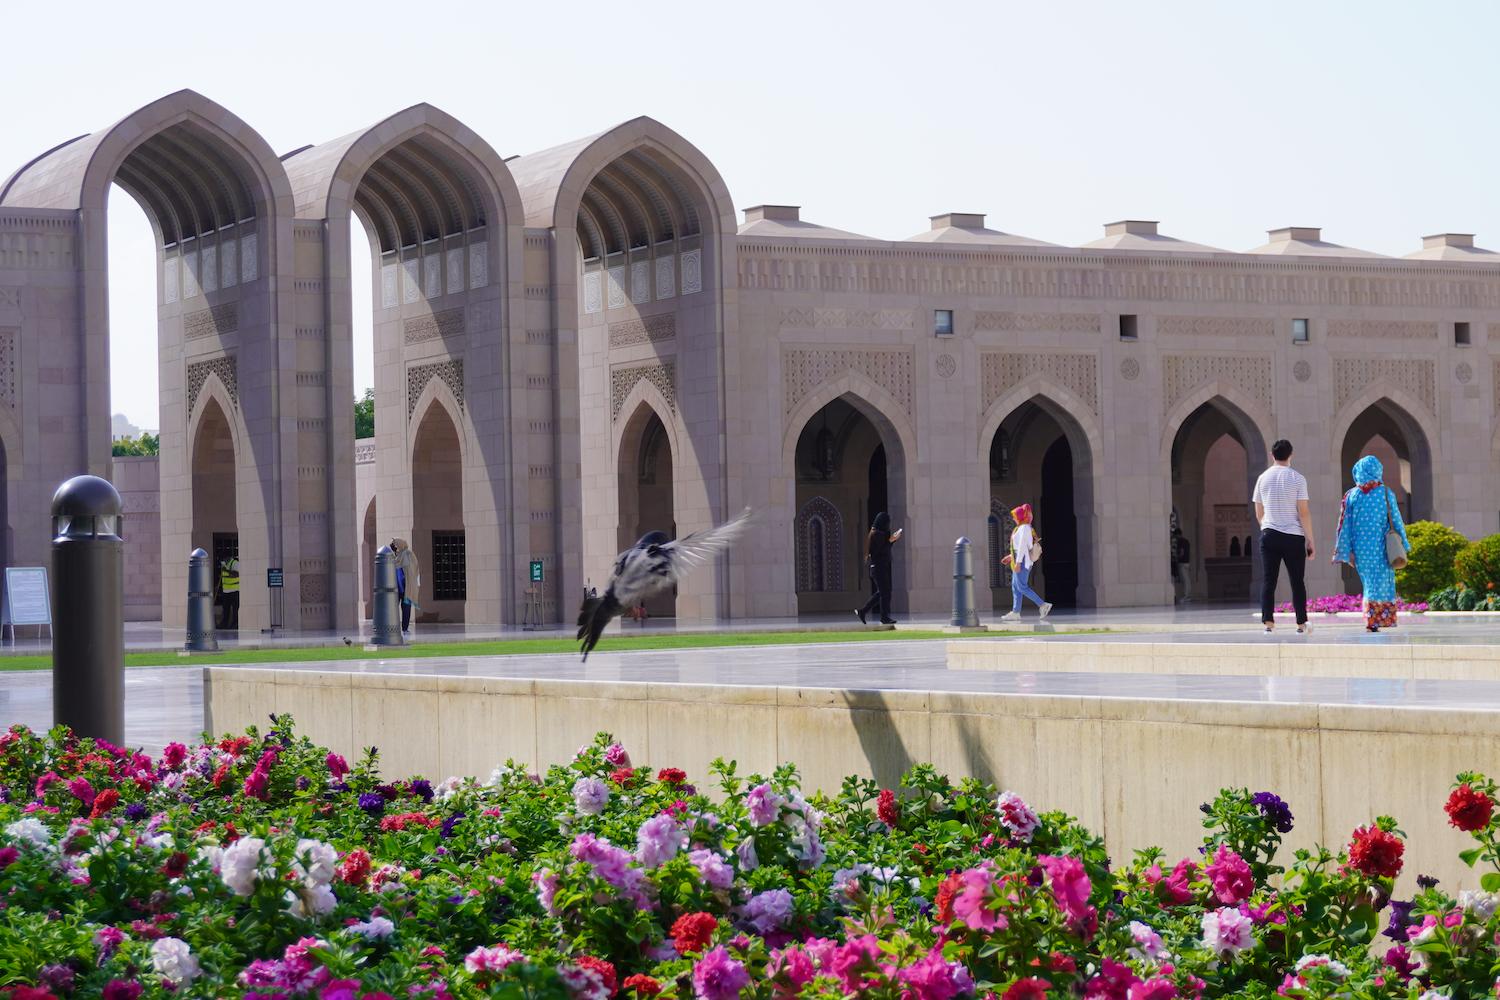 A bird’s in flight at the Sultan Qaboos Grand Mosque with red and purple flower garden below.